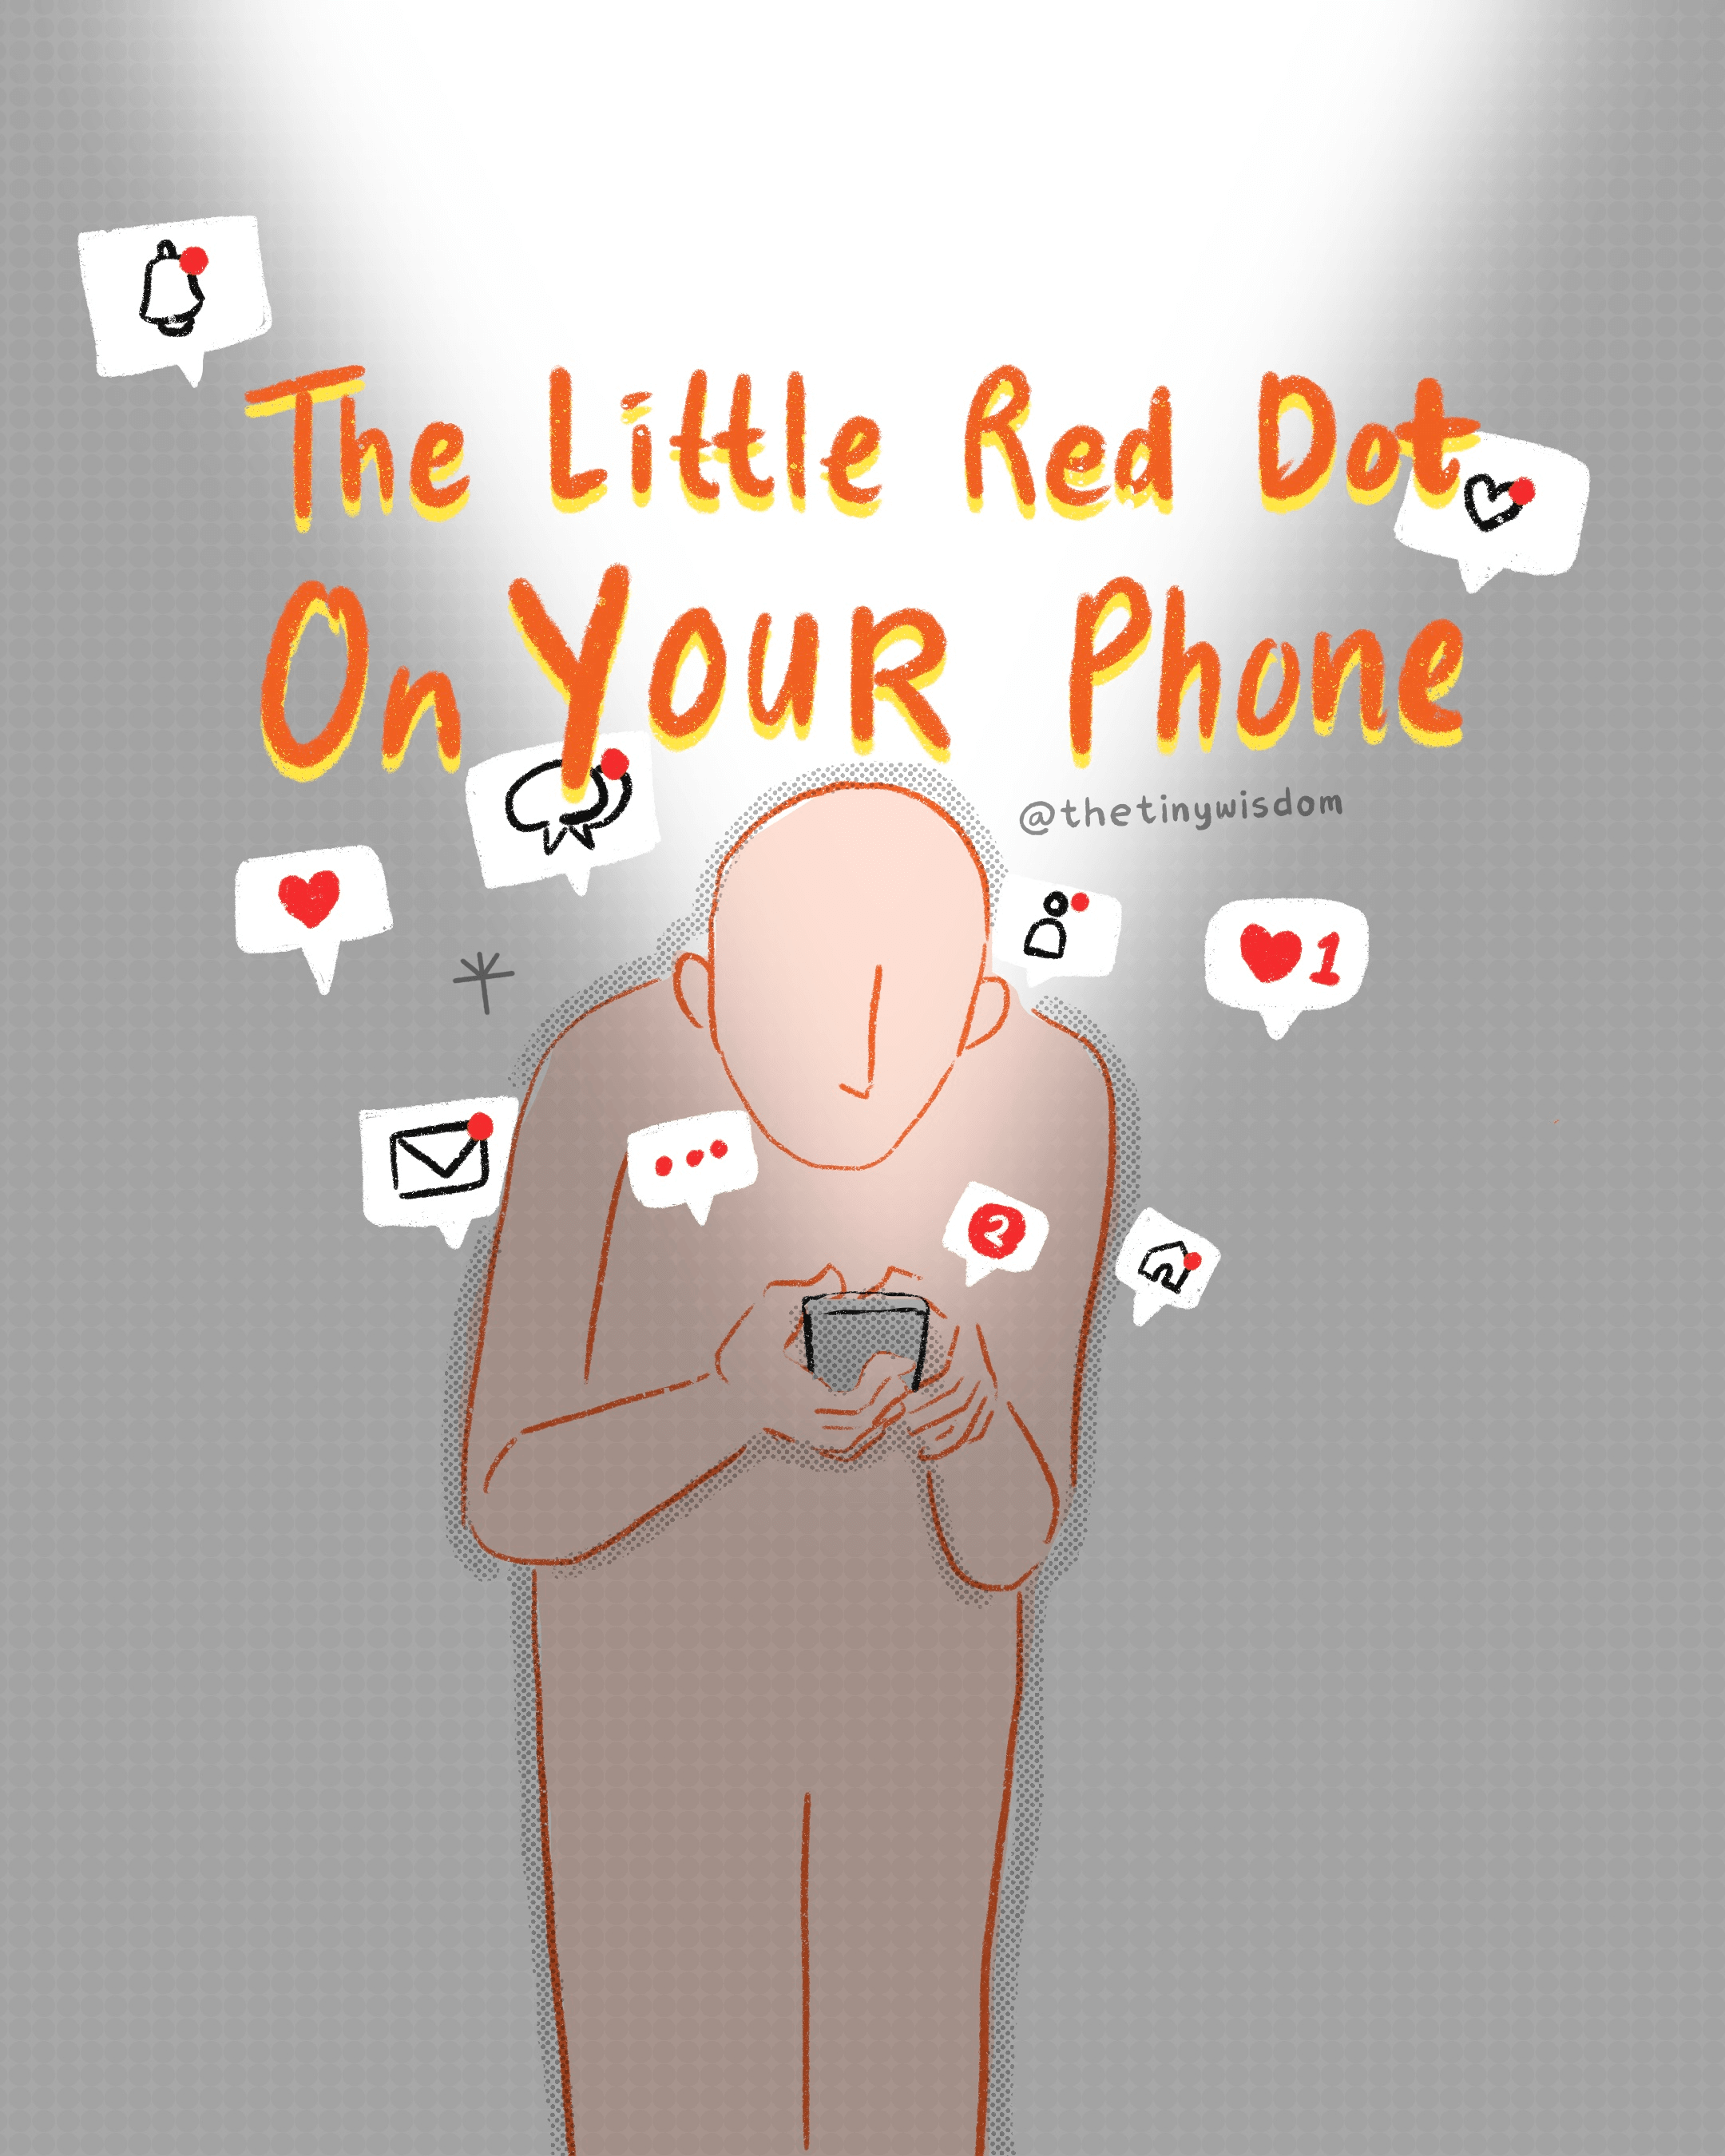 The little red dot on your phone